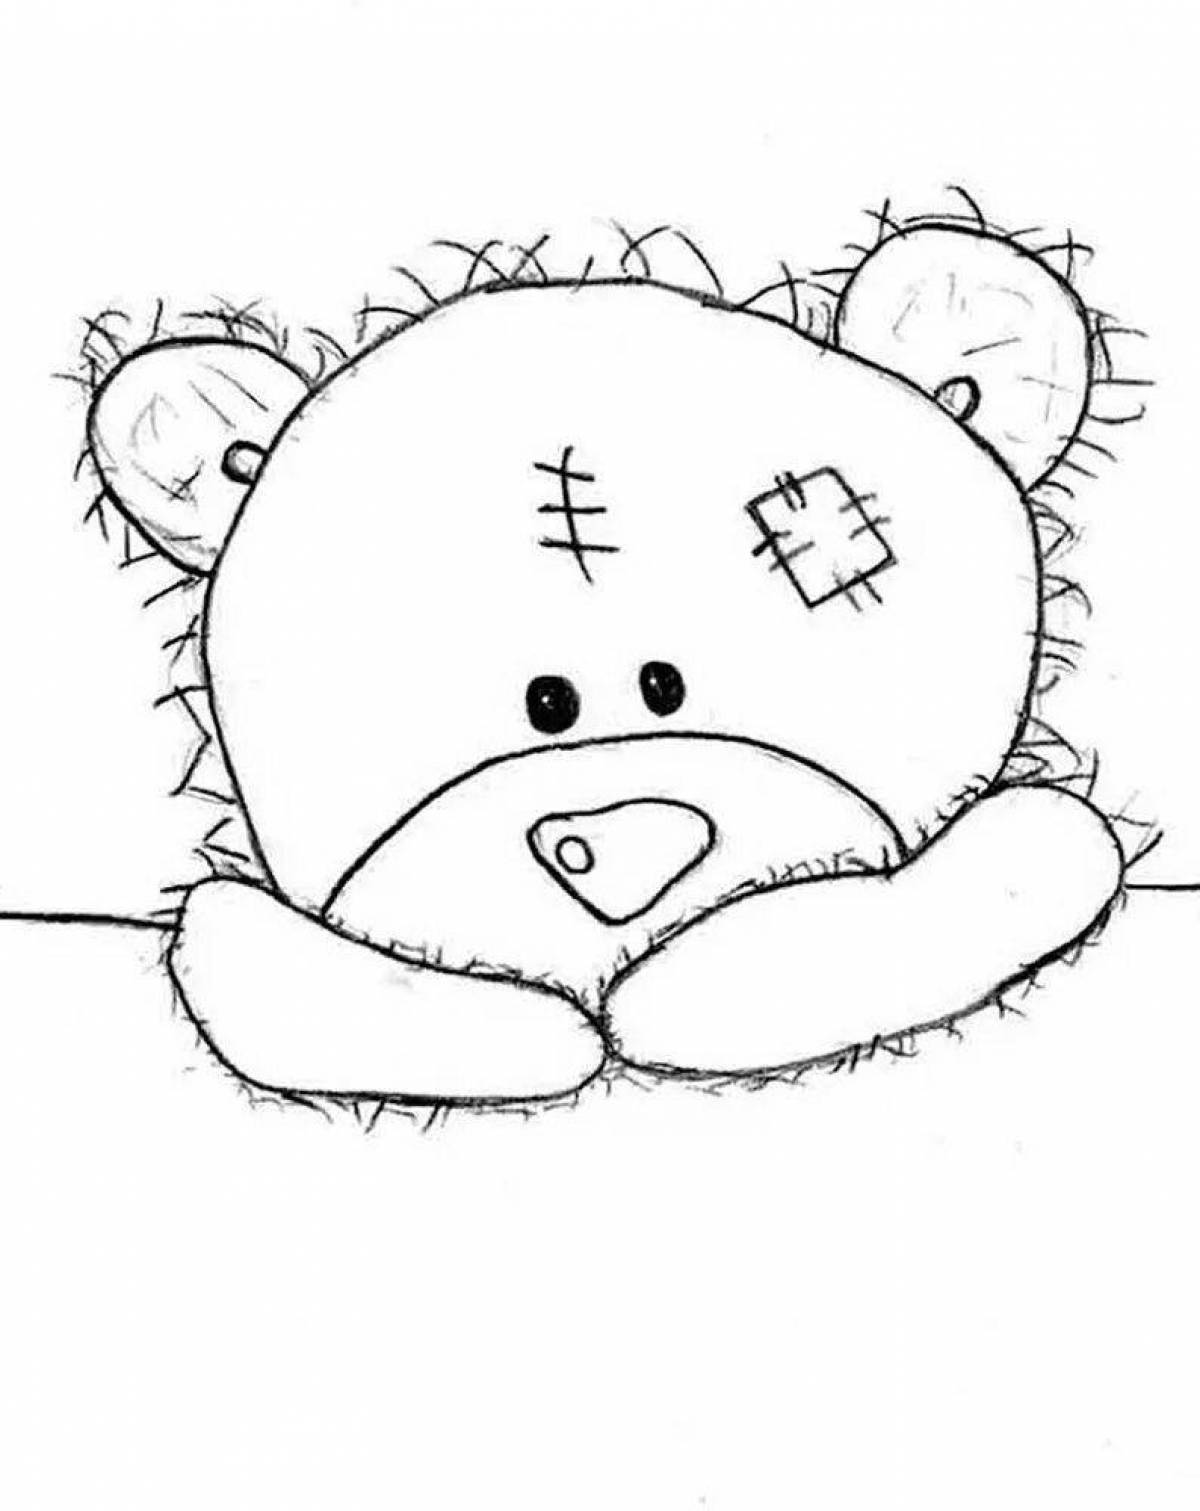 Coloring page adorable teddy bear